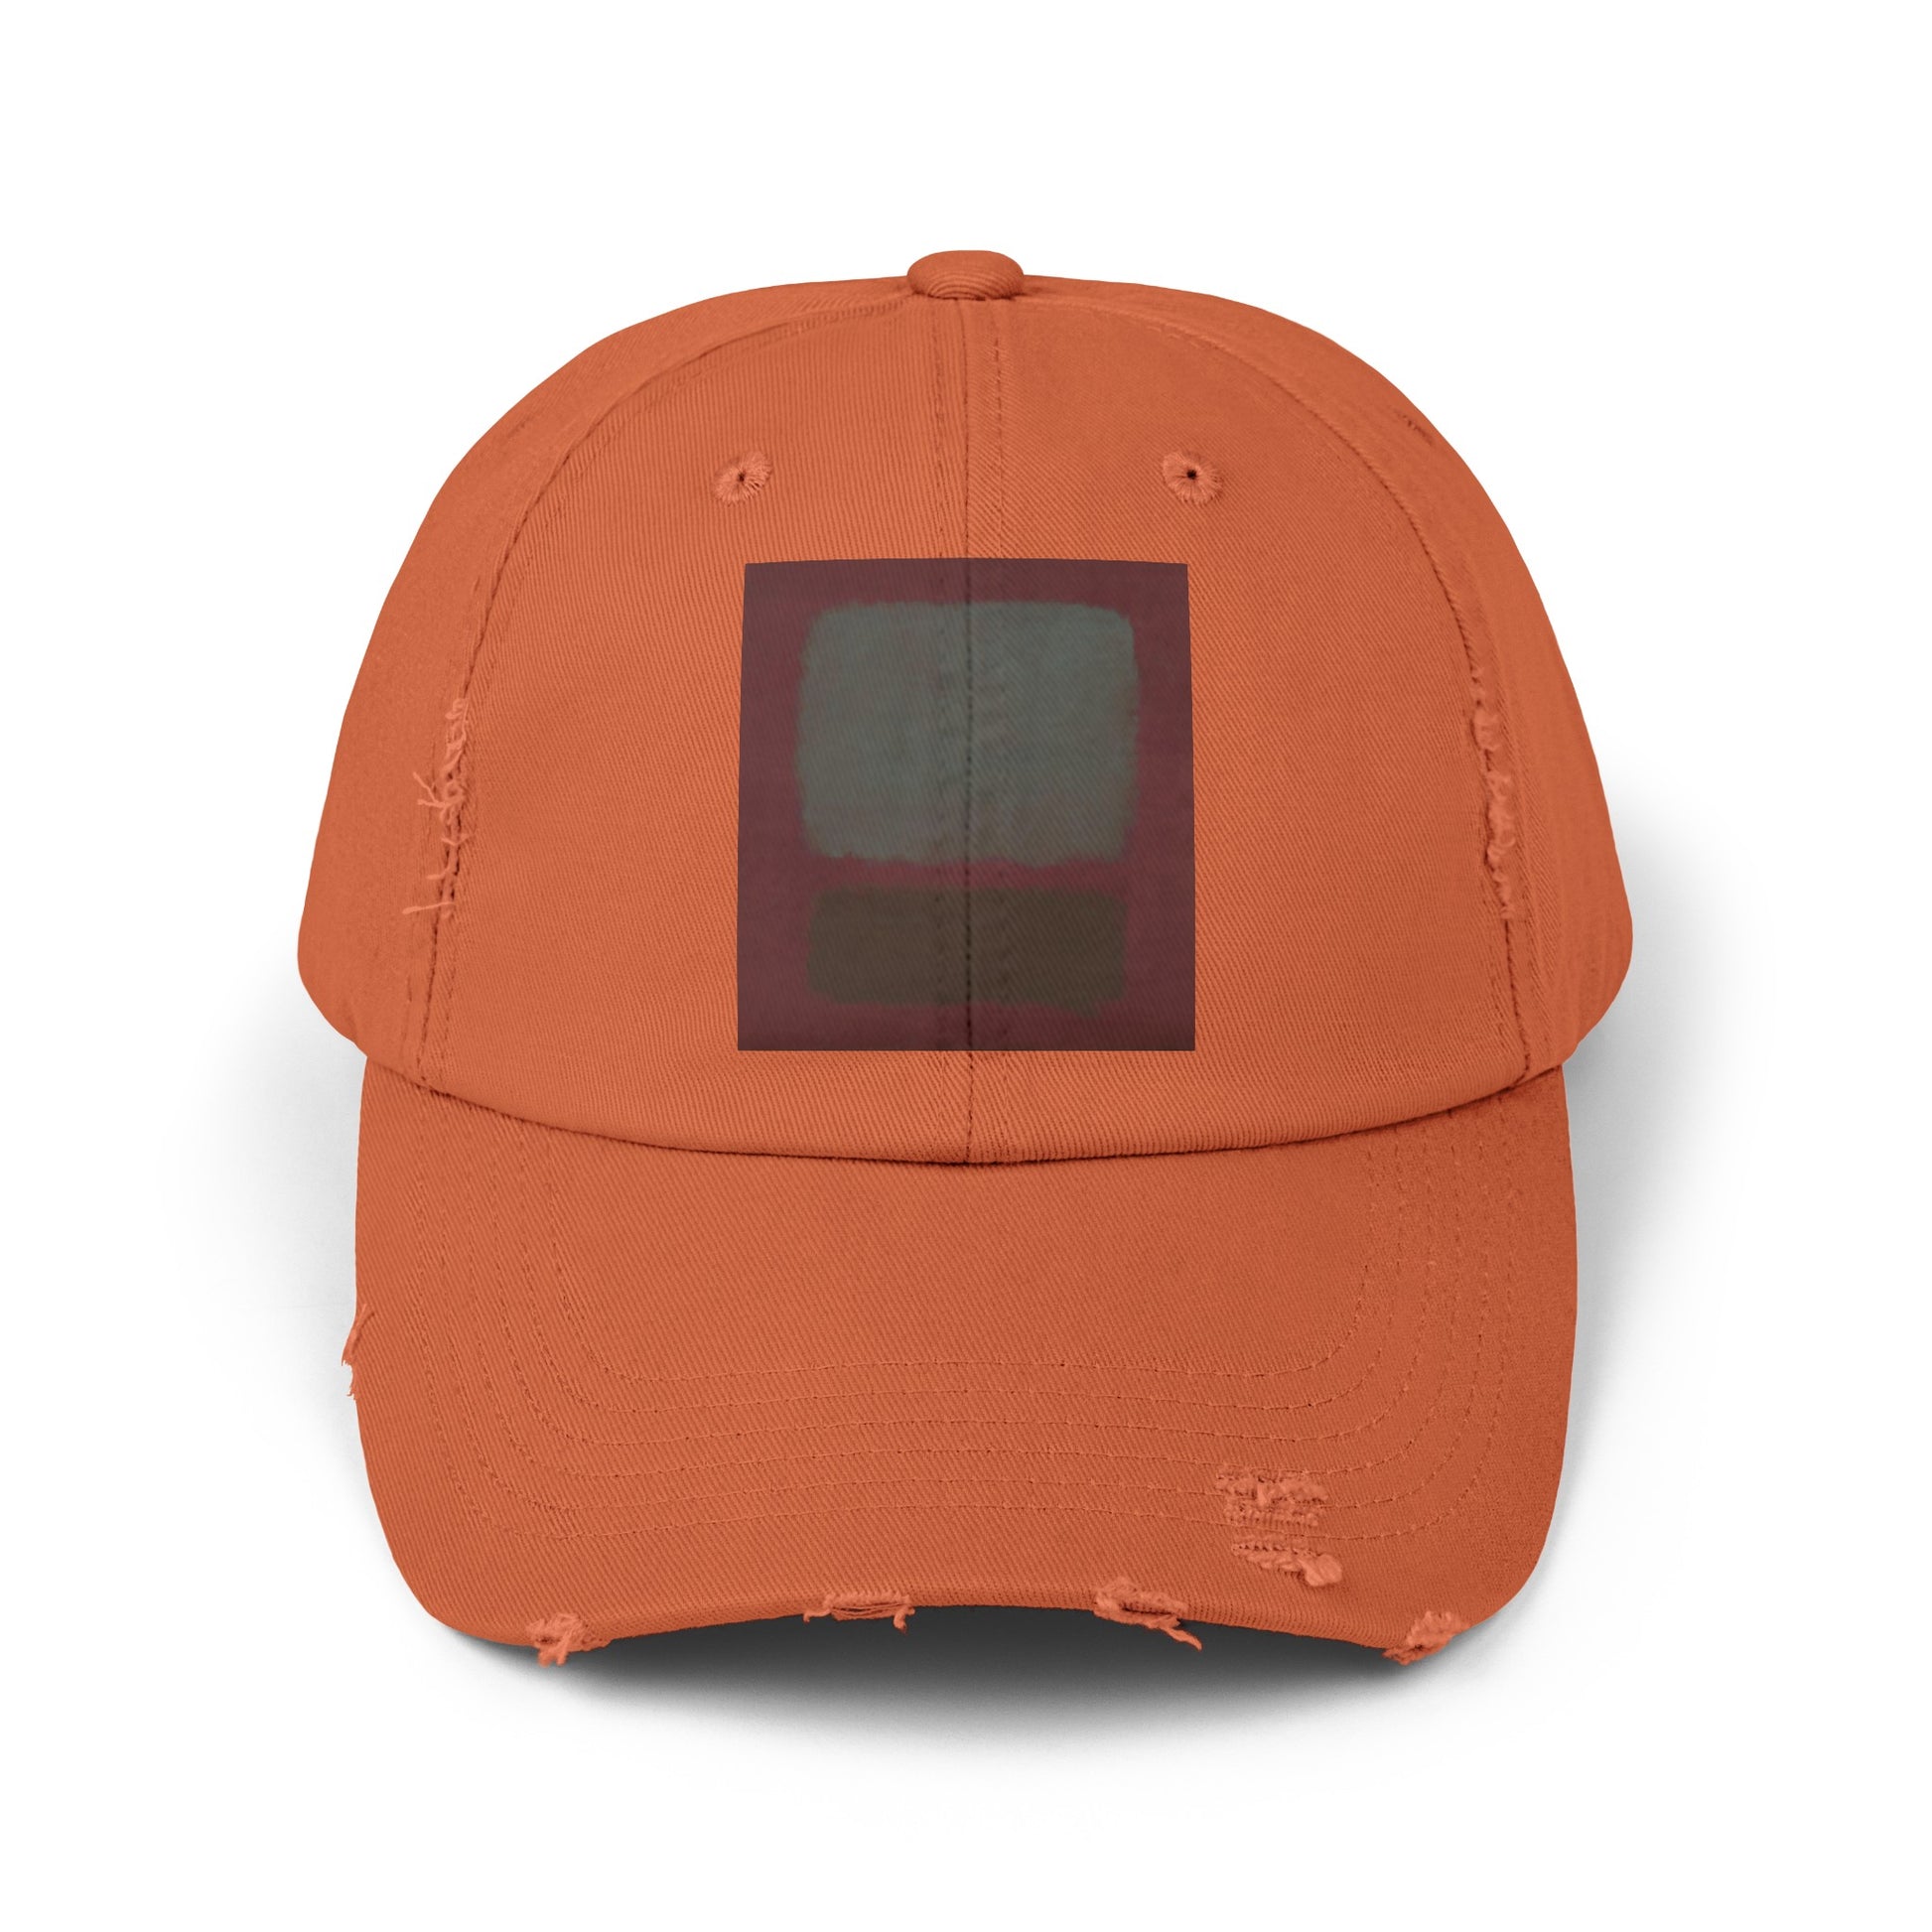 an orange baseball cap with a black square on it